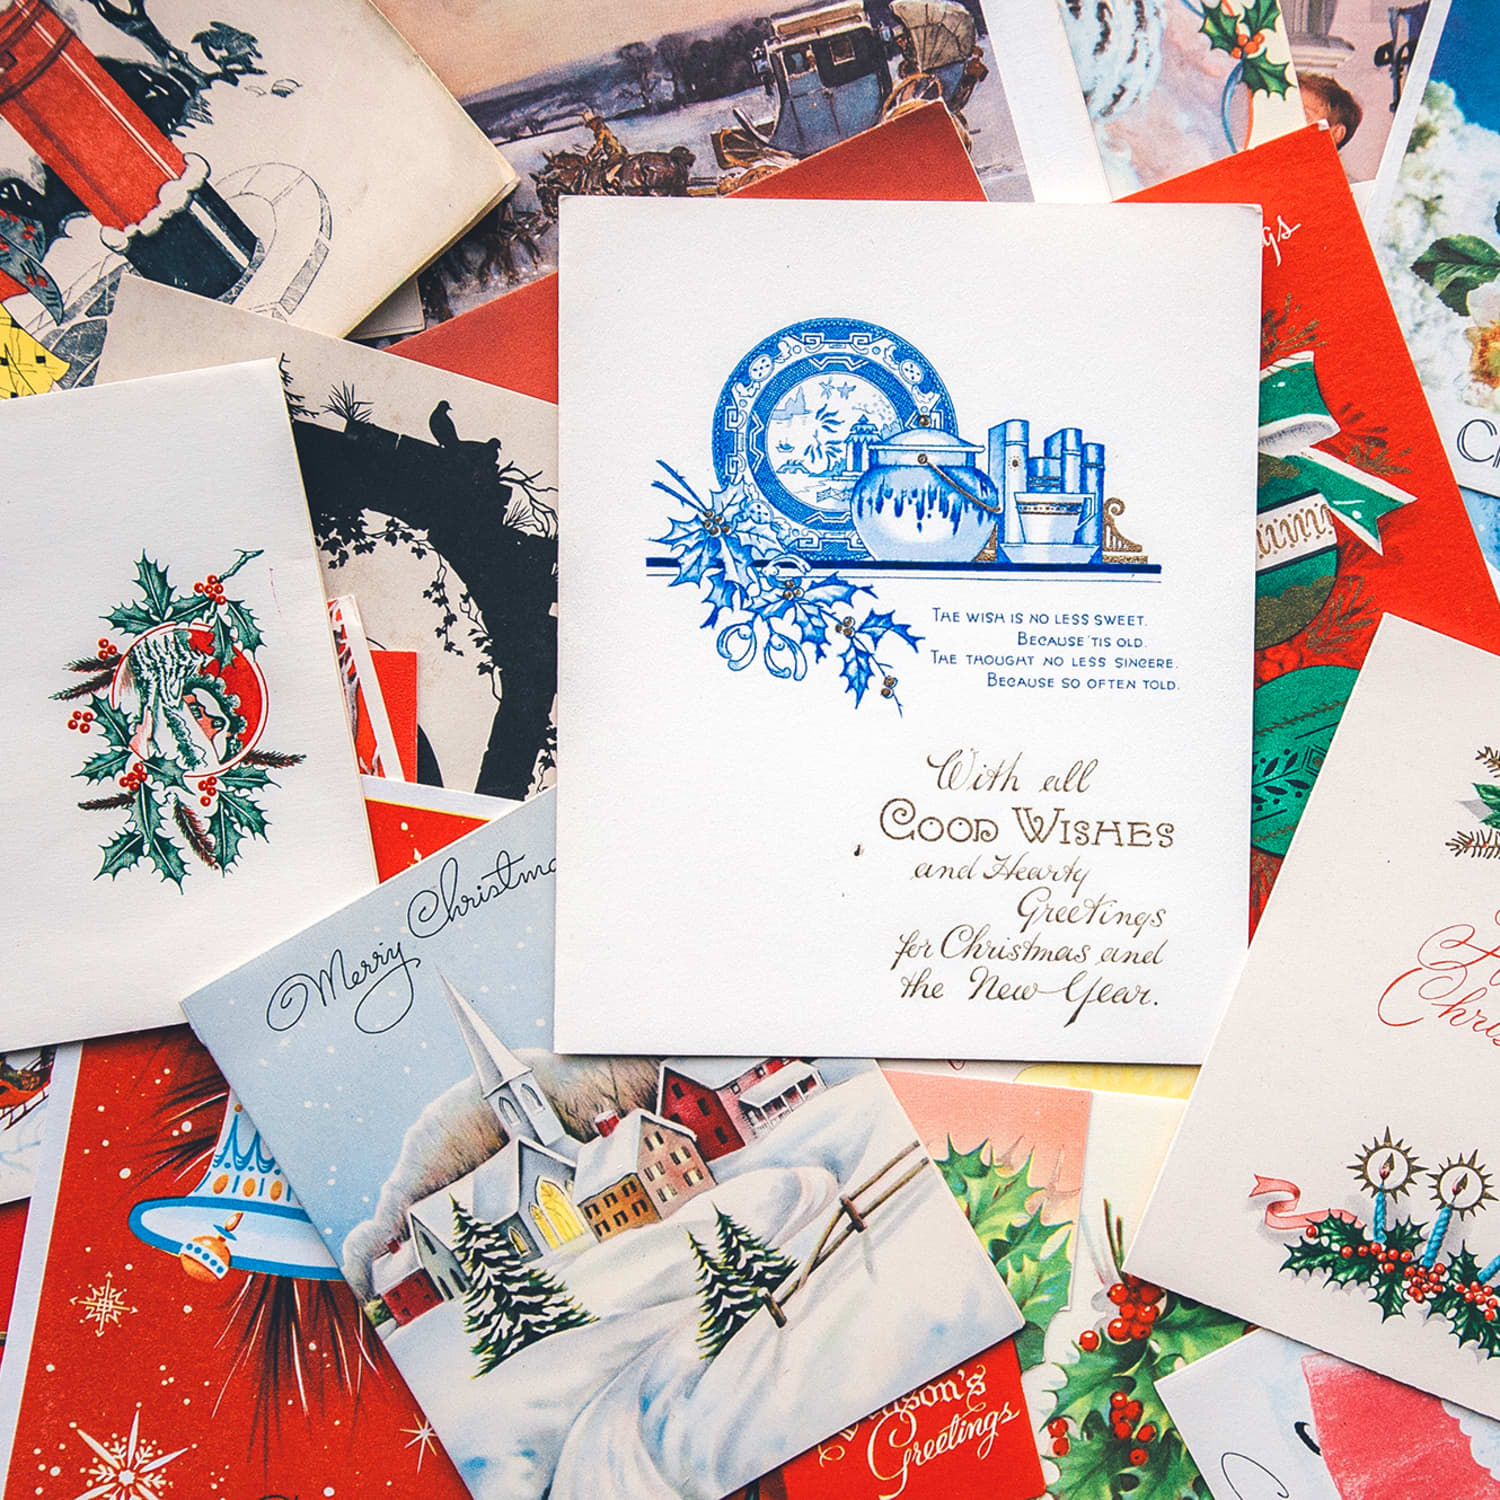 How to Sign Christmas Cards from Blended Family: Heartfelt Tips